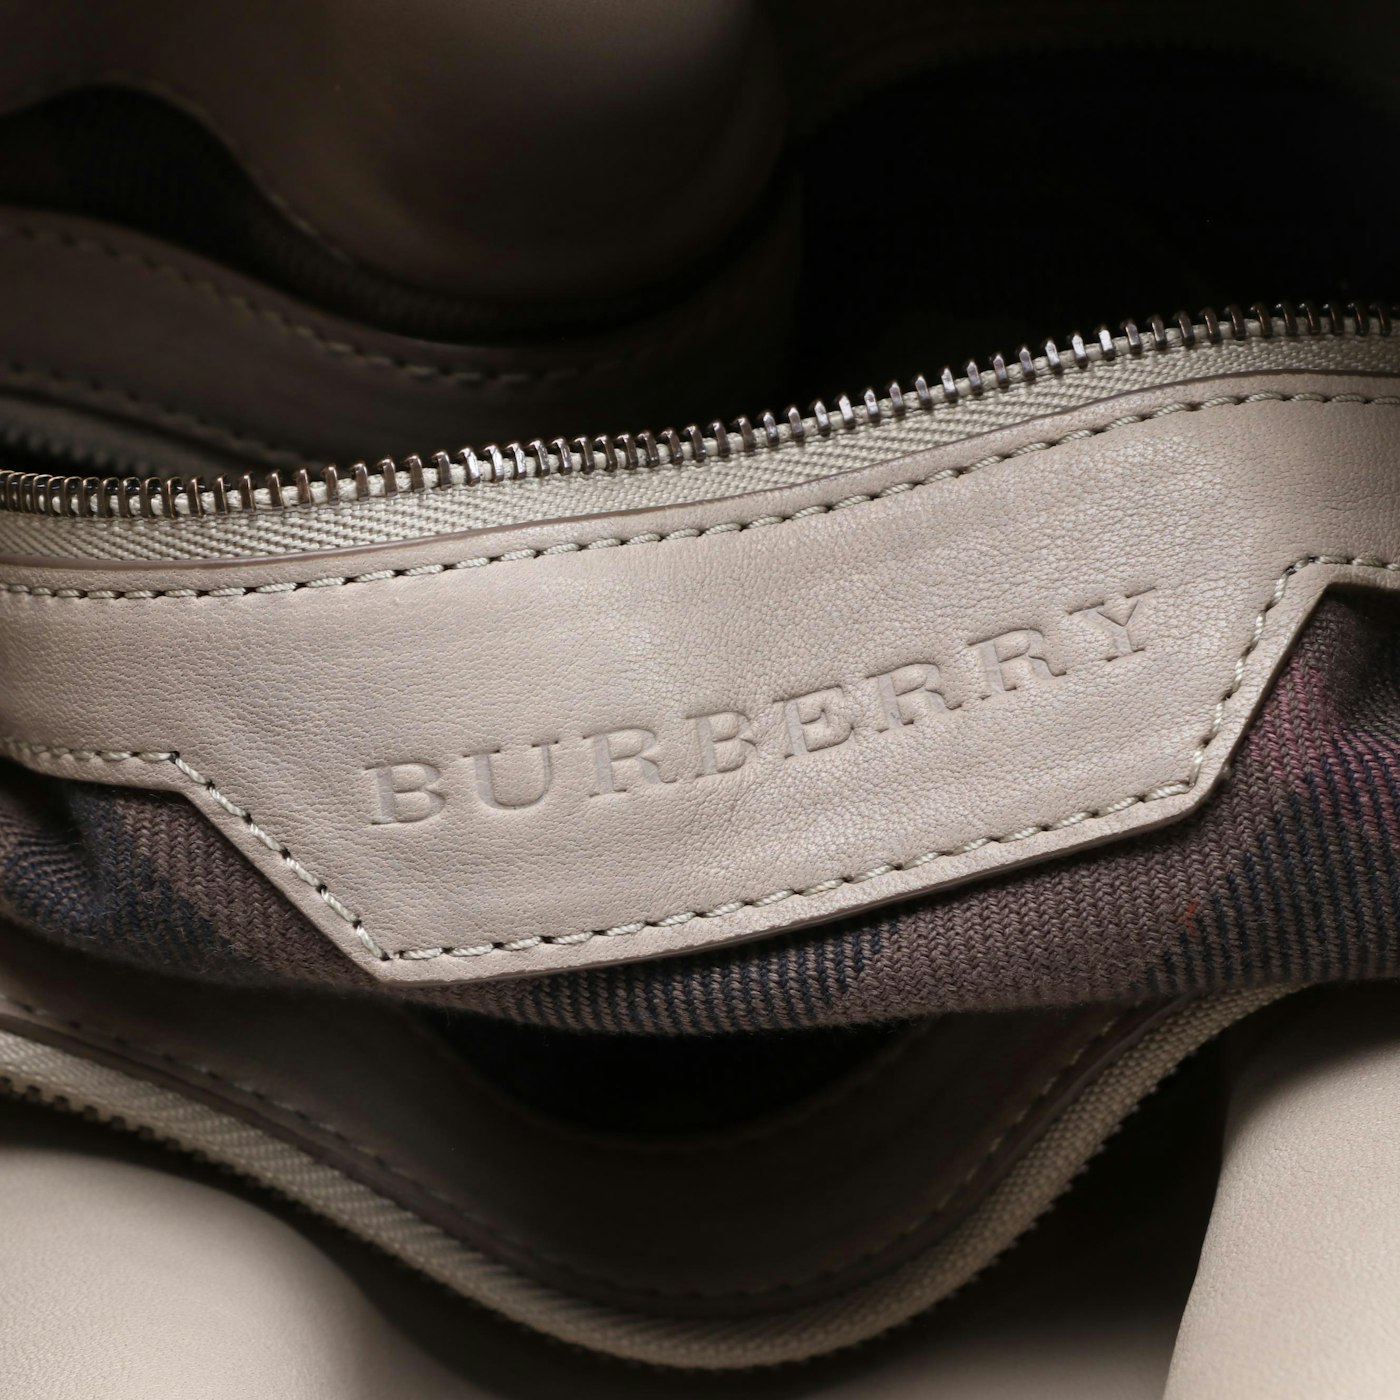 Burberry serial number check blacklist